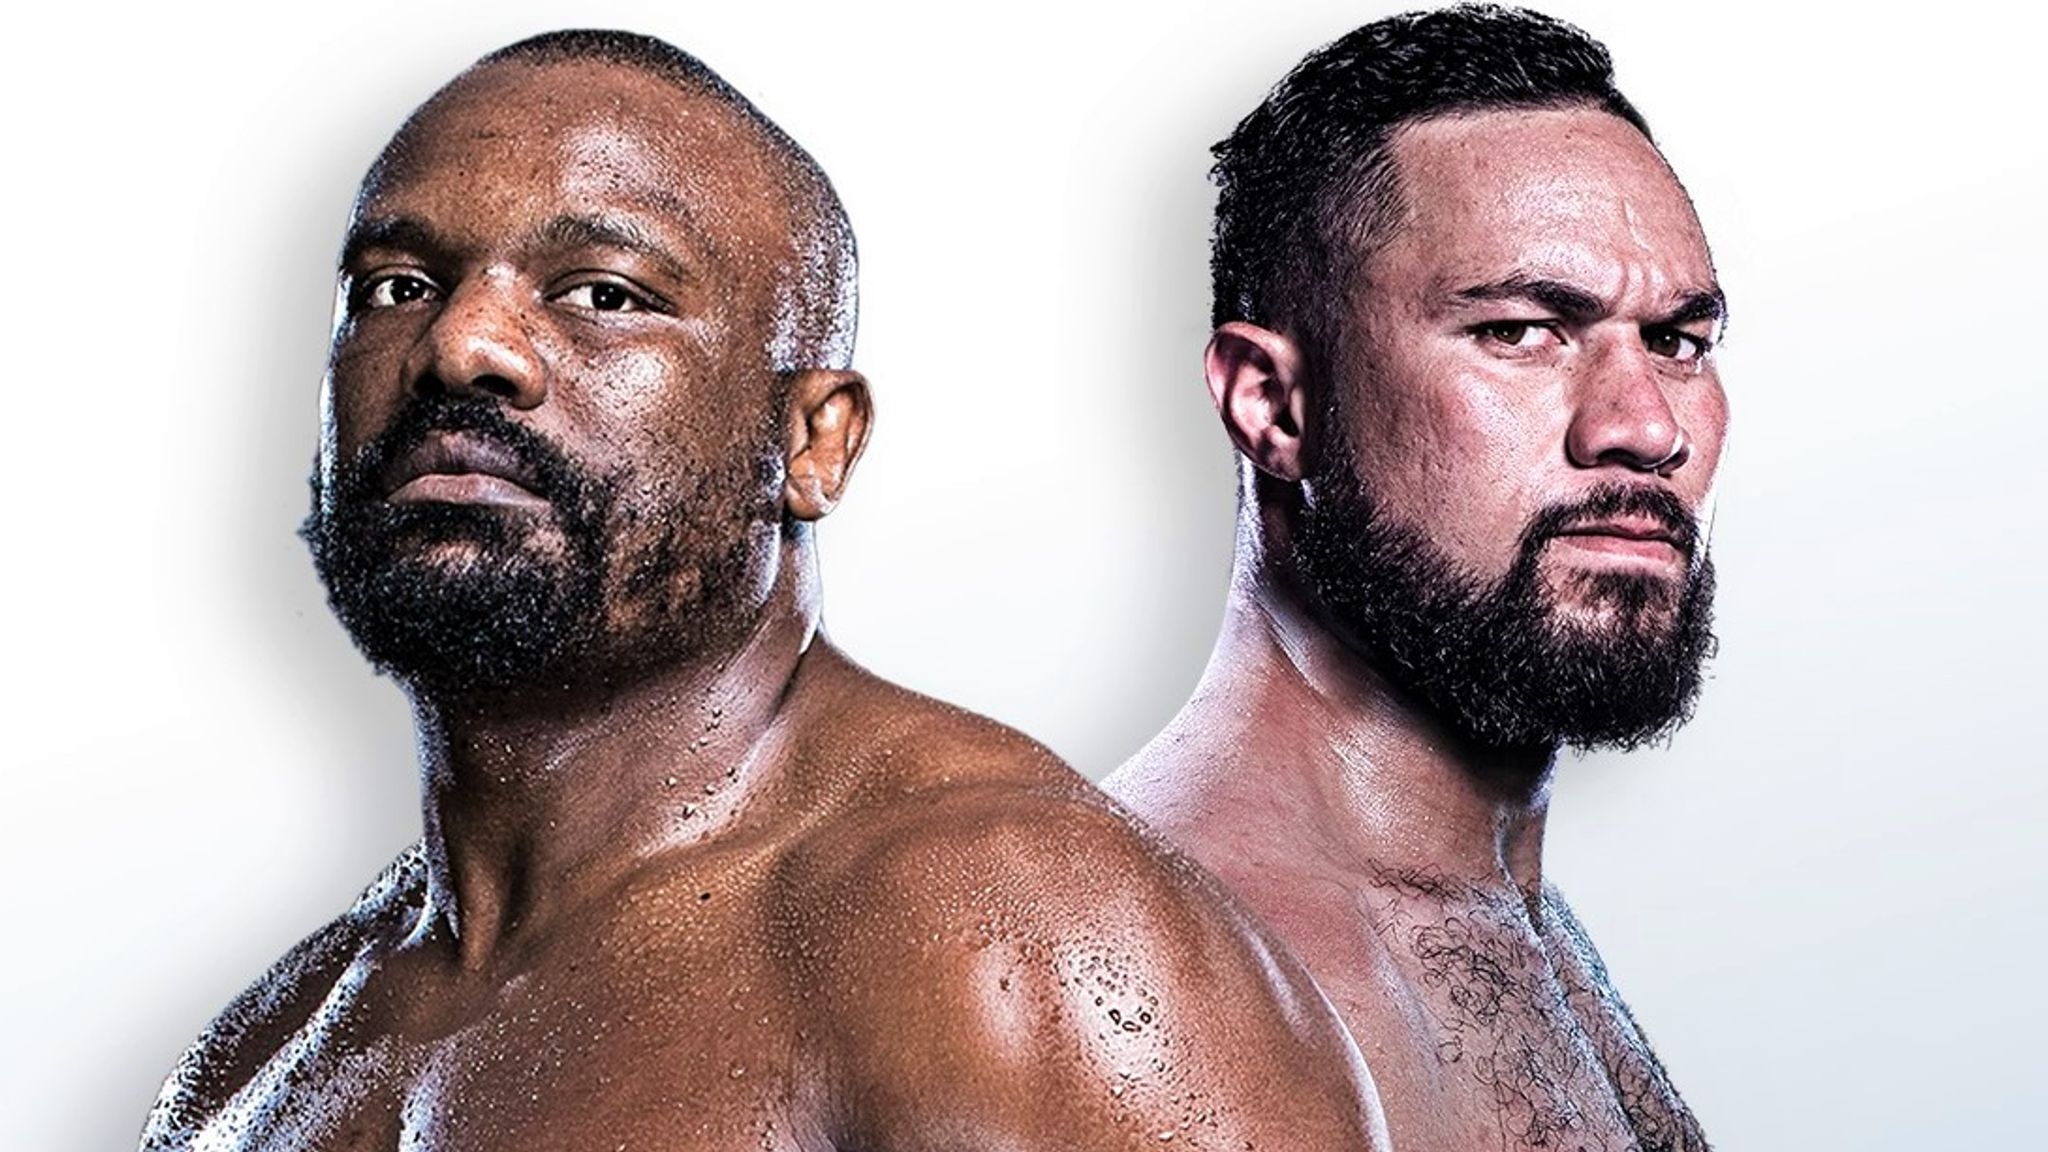 Derek Chisora and Joseph Parker welcome fresh talks about rescheduled fight after spider bite scuppered showdown Boxing News Sky Sports